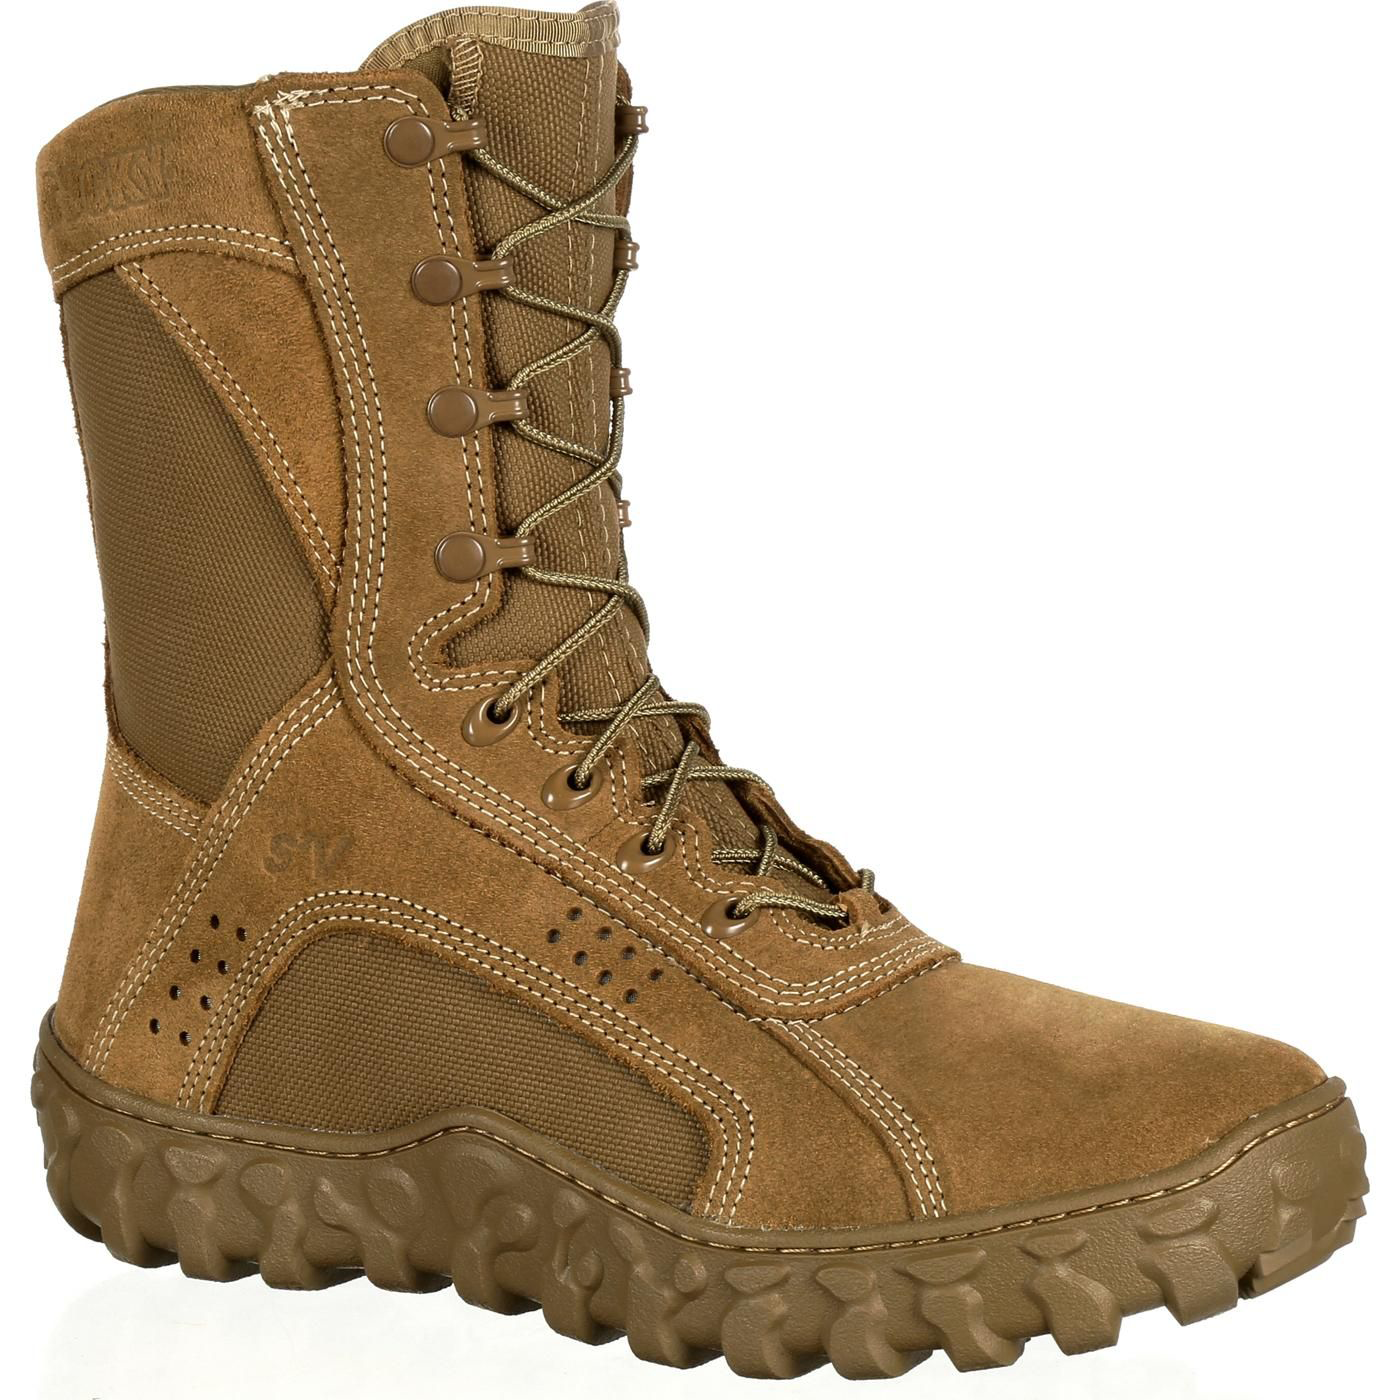 Rocky S2V Tactical Military Boots for Men - Coyote Brown - 18M